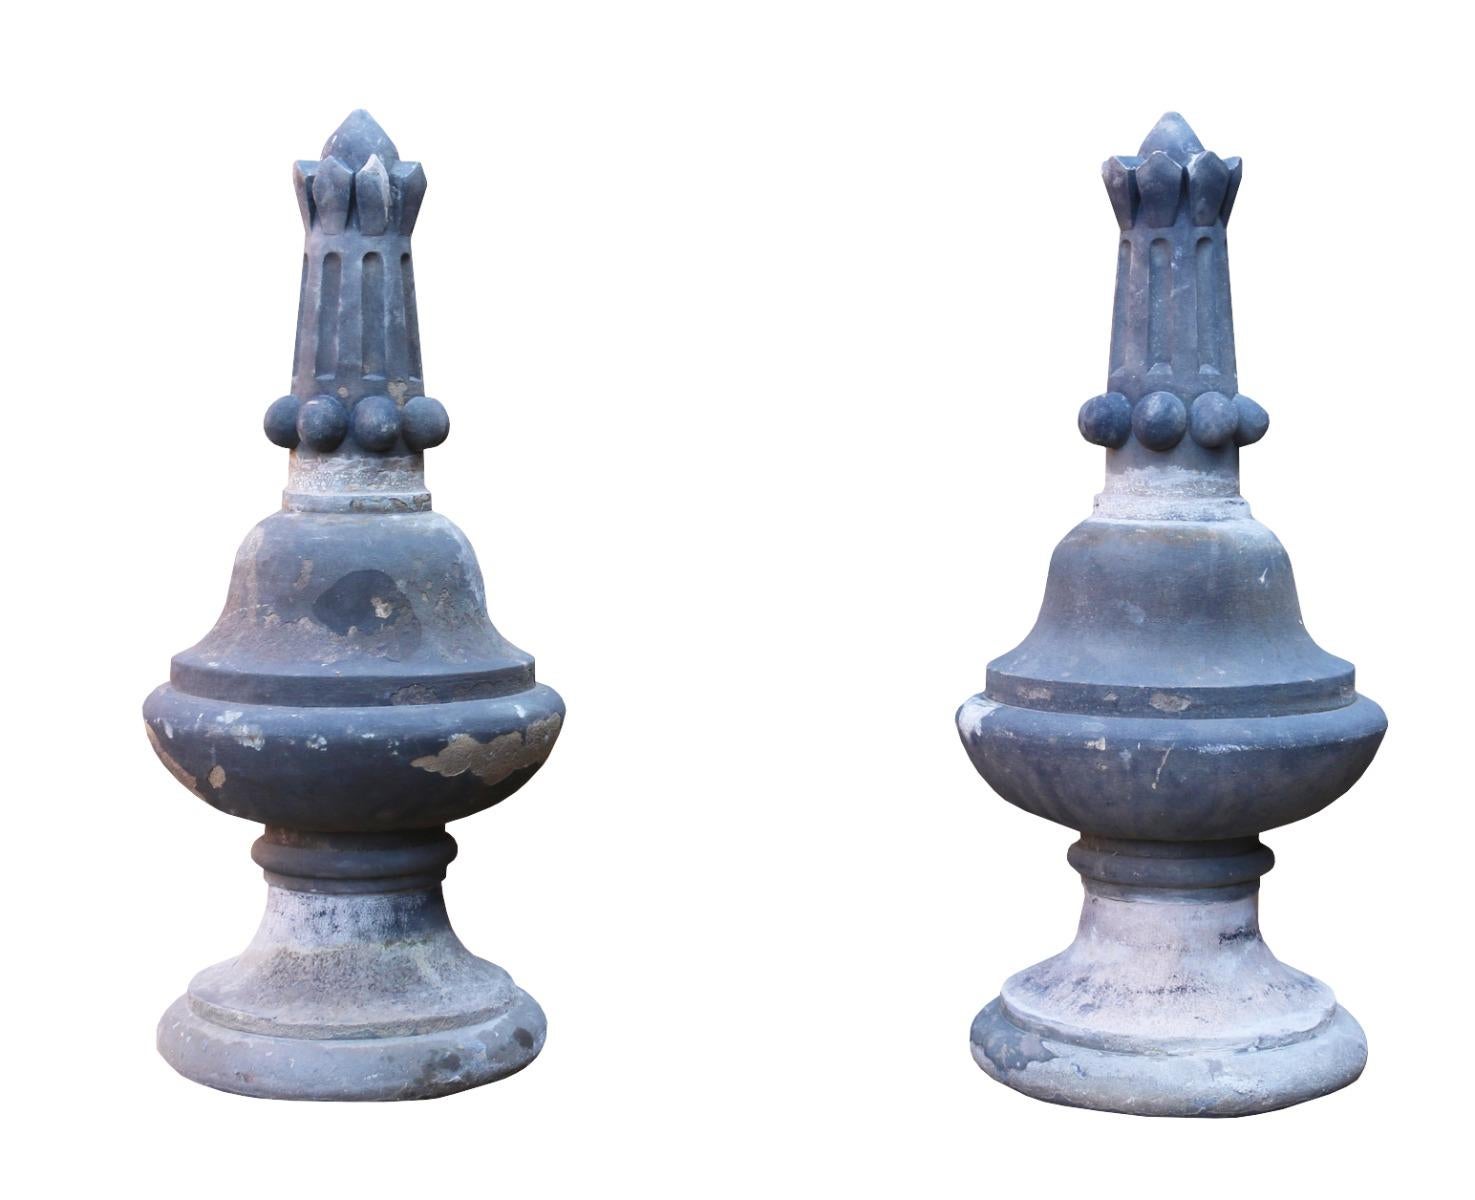 A pair of antique carved stone finials.

Additional dimensions

Diameter 35 cm (widest part) 31 cm (base).